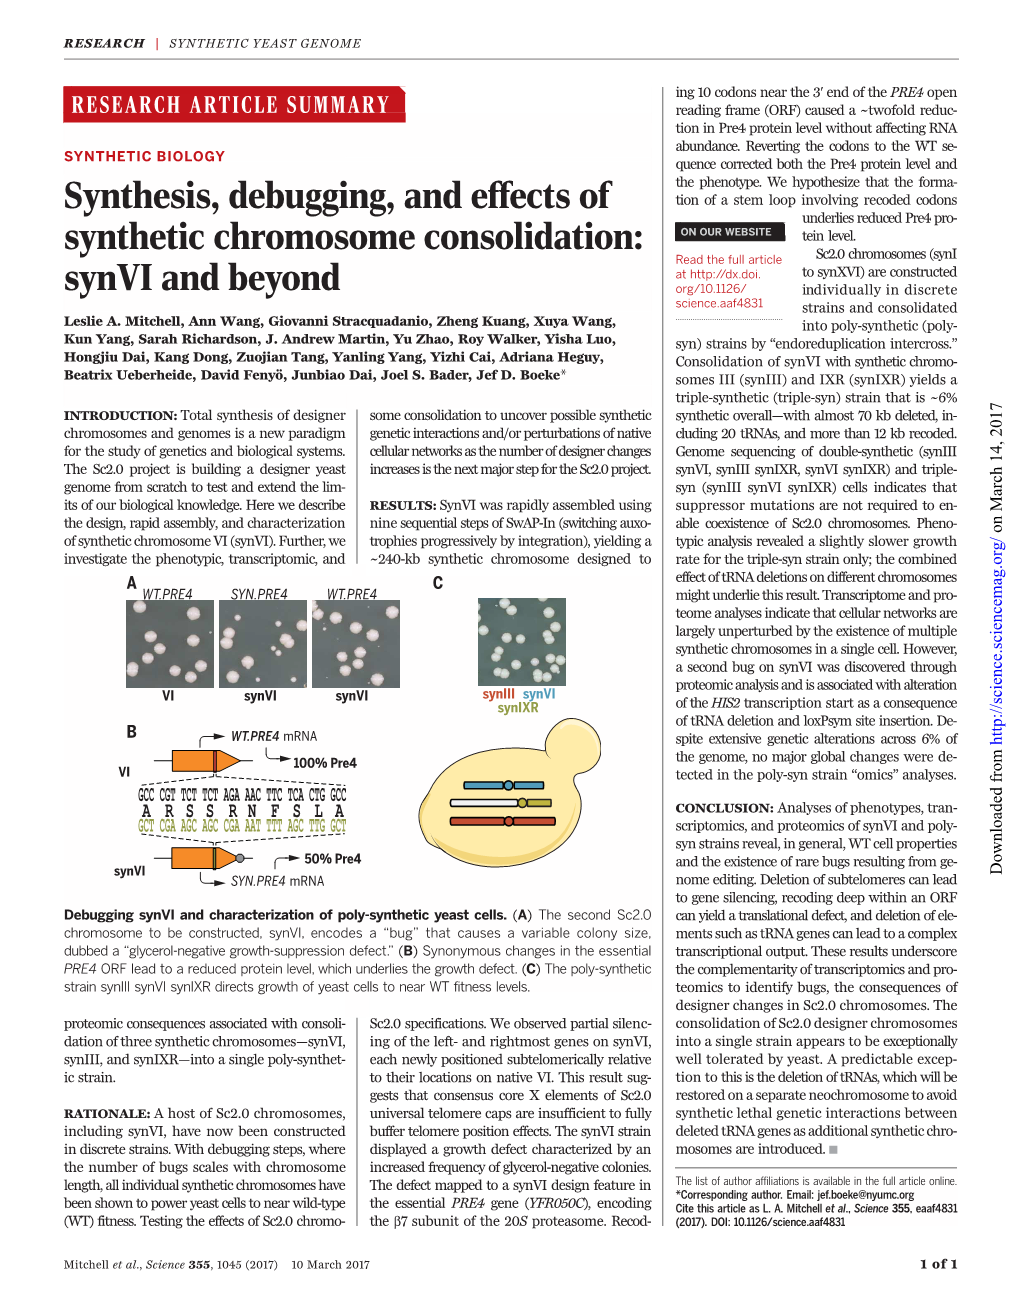 Synthesis, Debugging, and Effects of Synthetic Chromosome Consolidation: Synvi and Beyond Leslie A